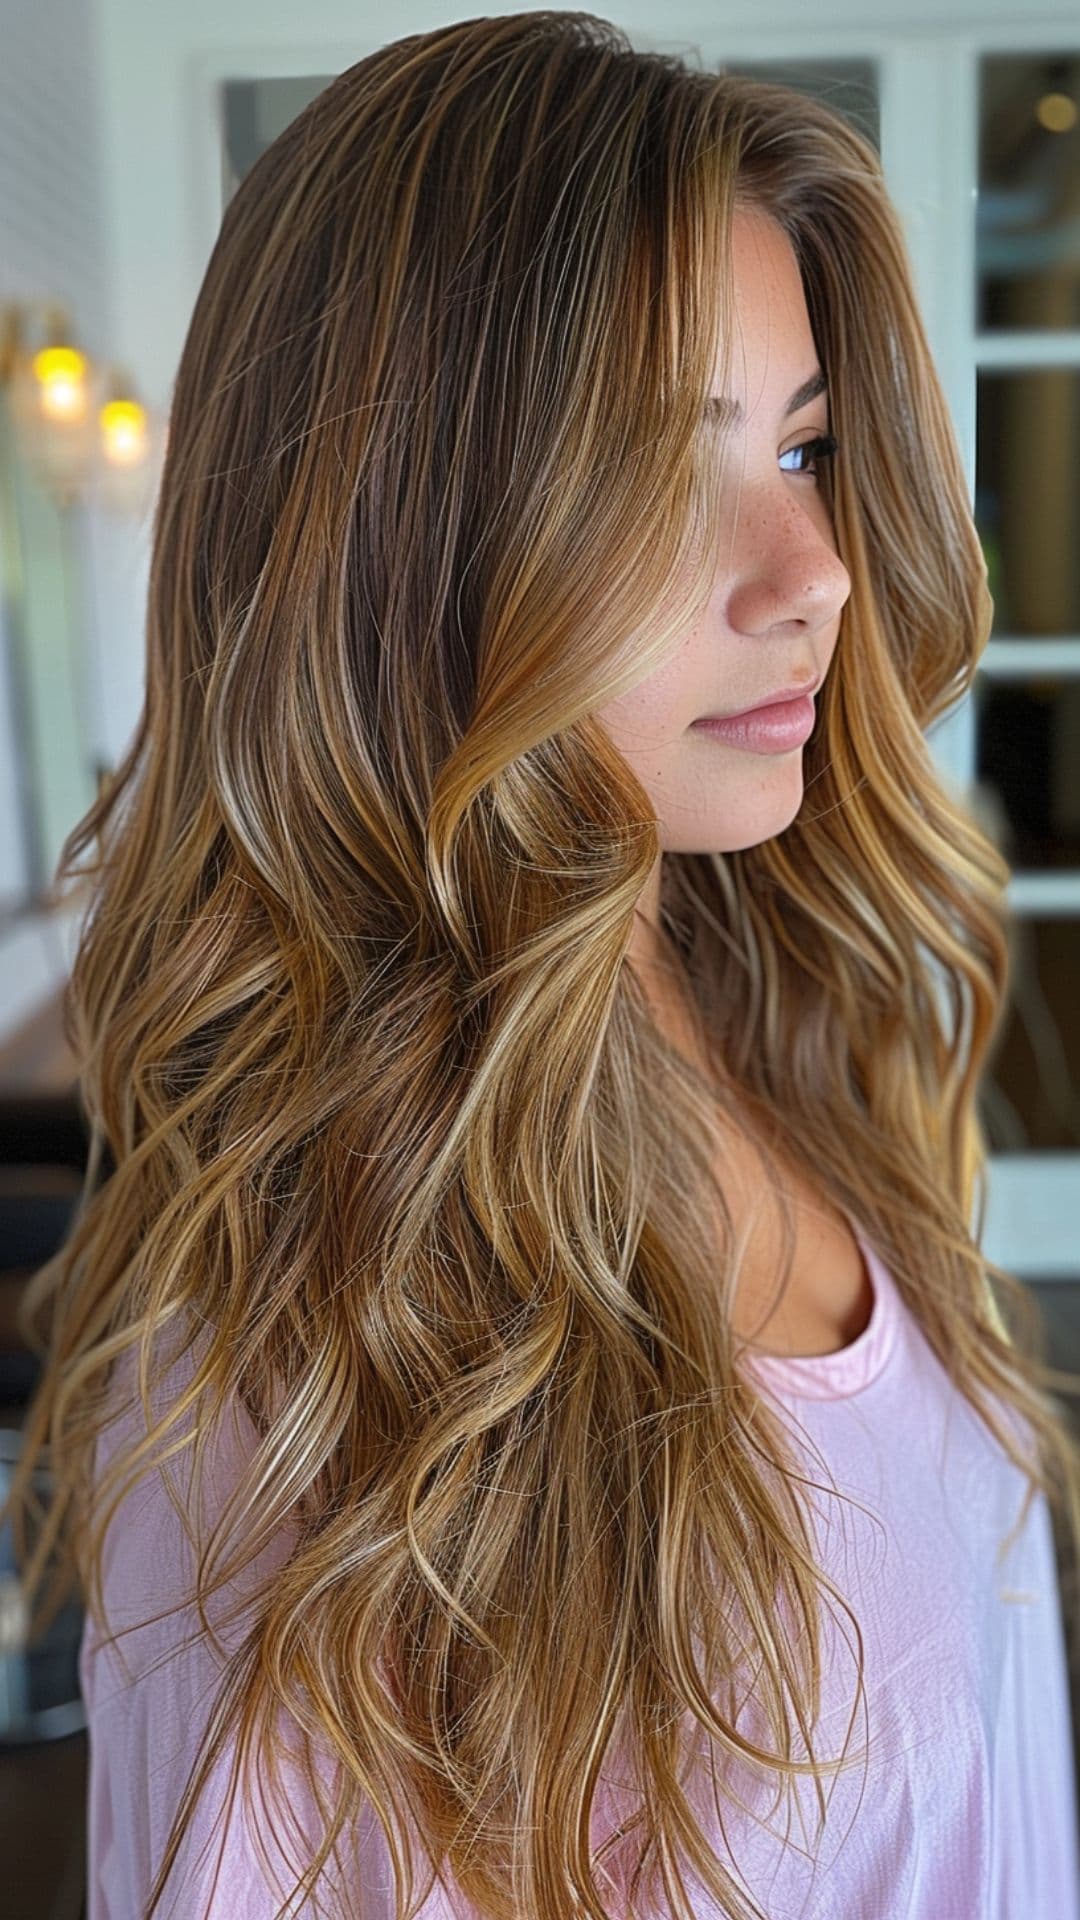 A young woman modelling a warm caramel hair.